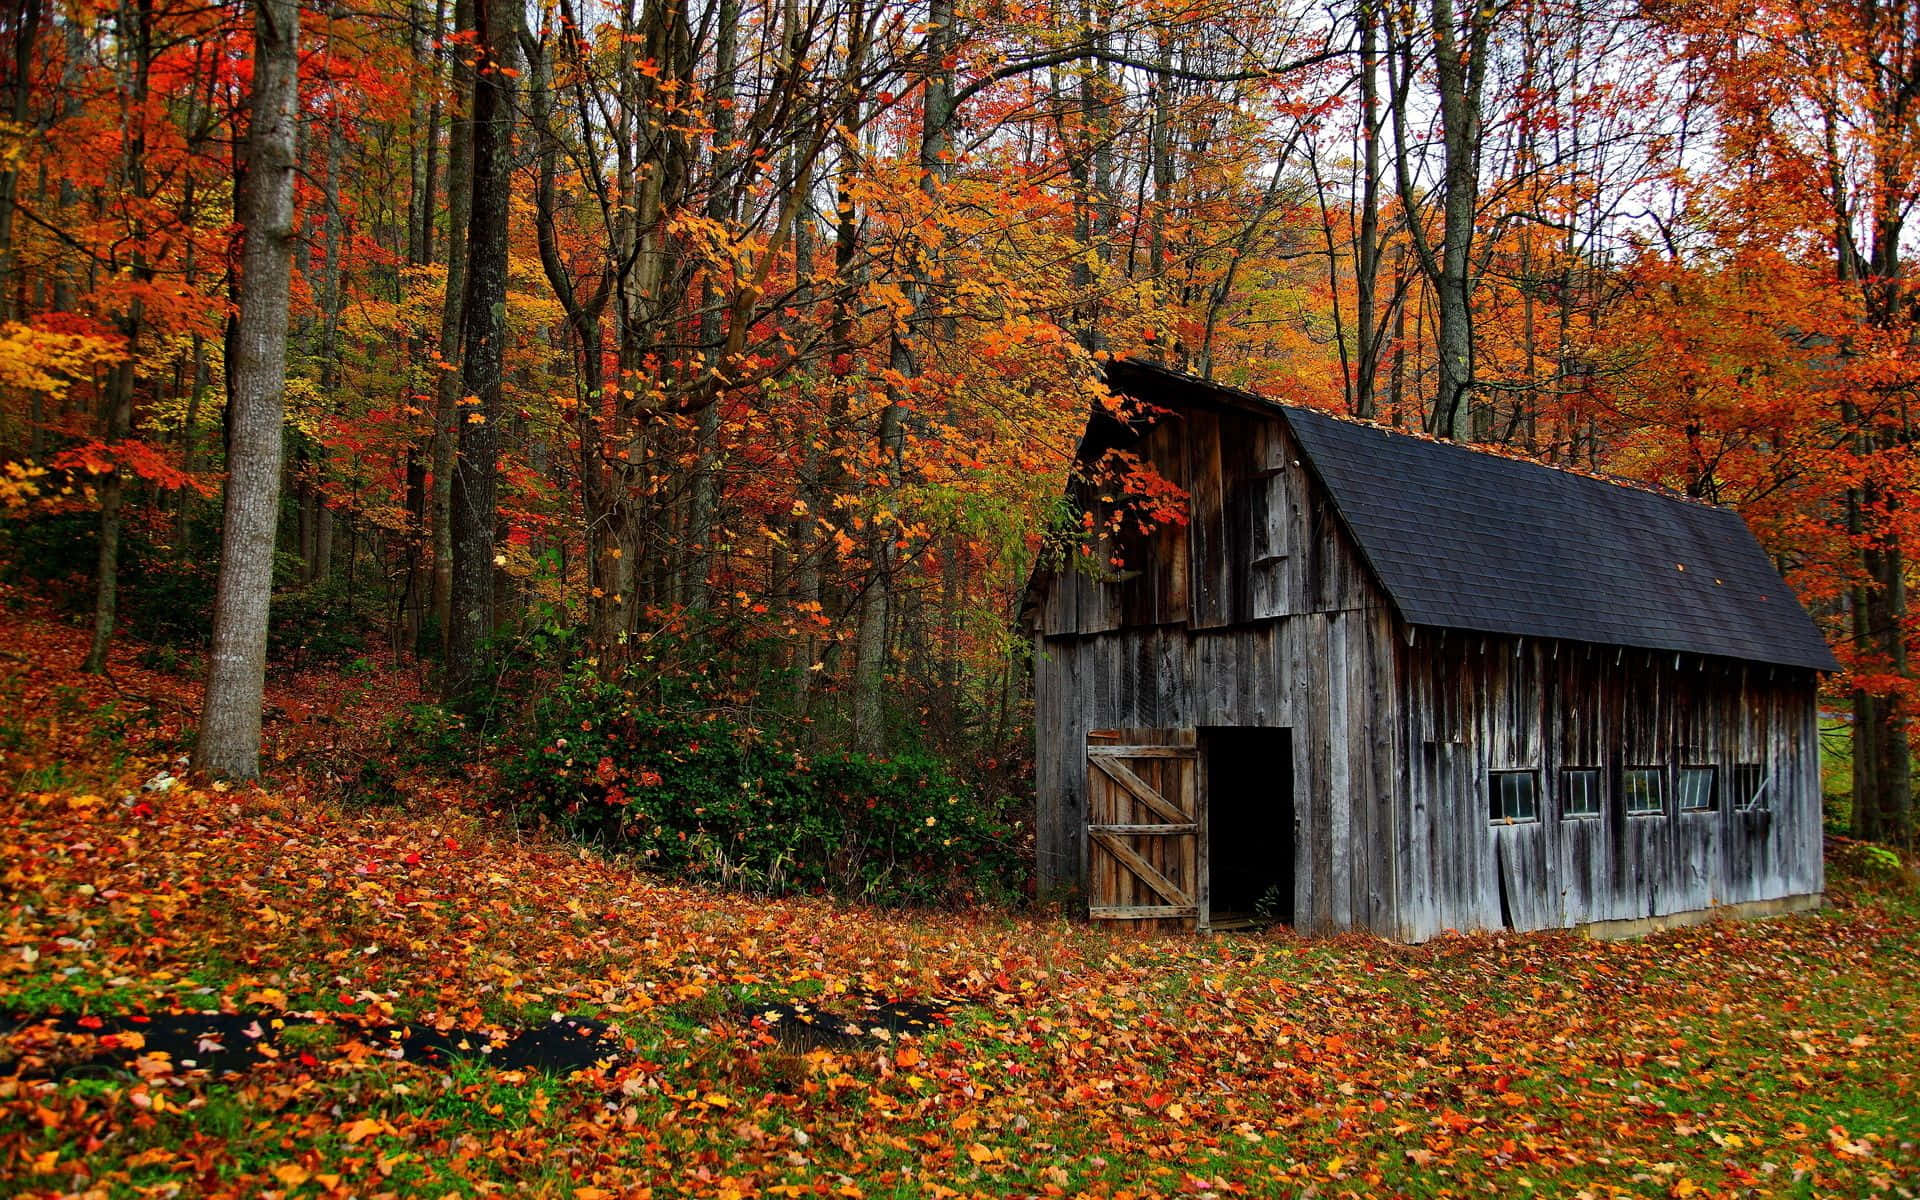 "A peaceful landscape featuring a traditional barn"